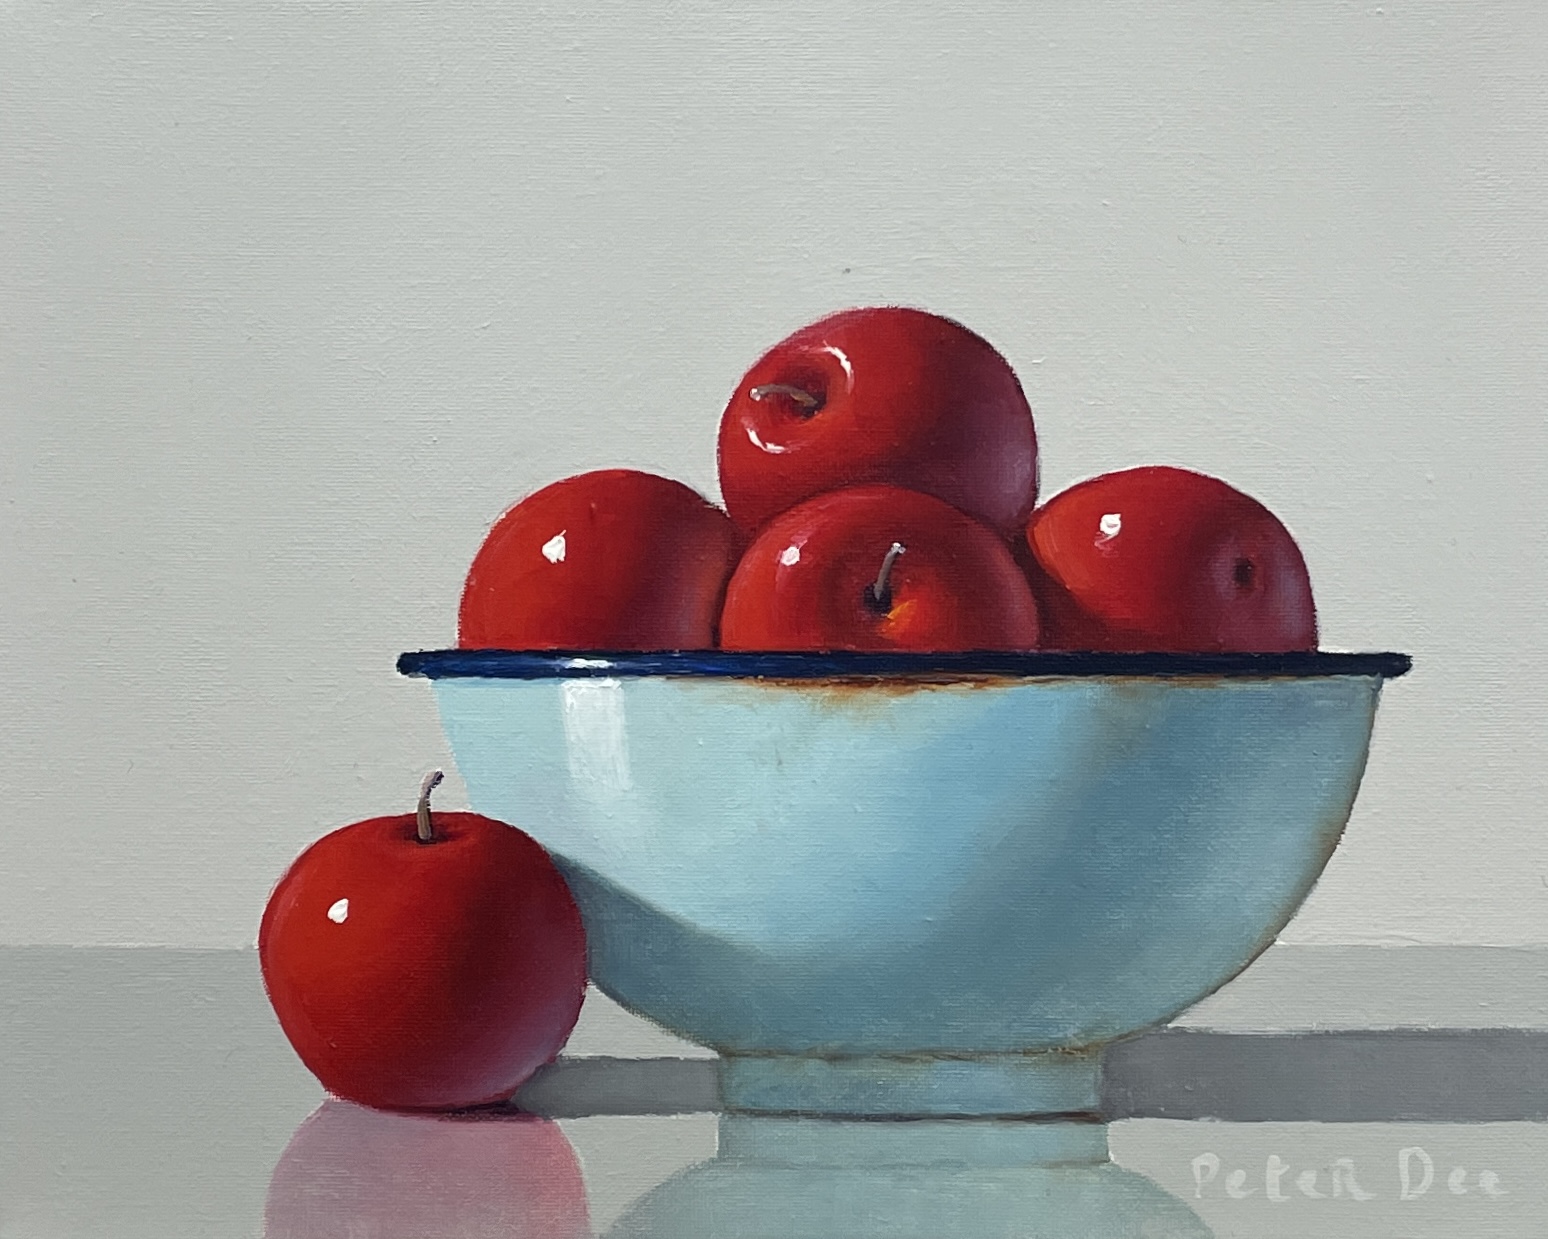 Peter Dee - Bowl of red apples **Special Christmas Show Price**